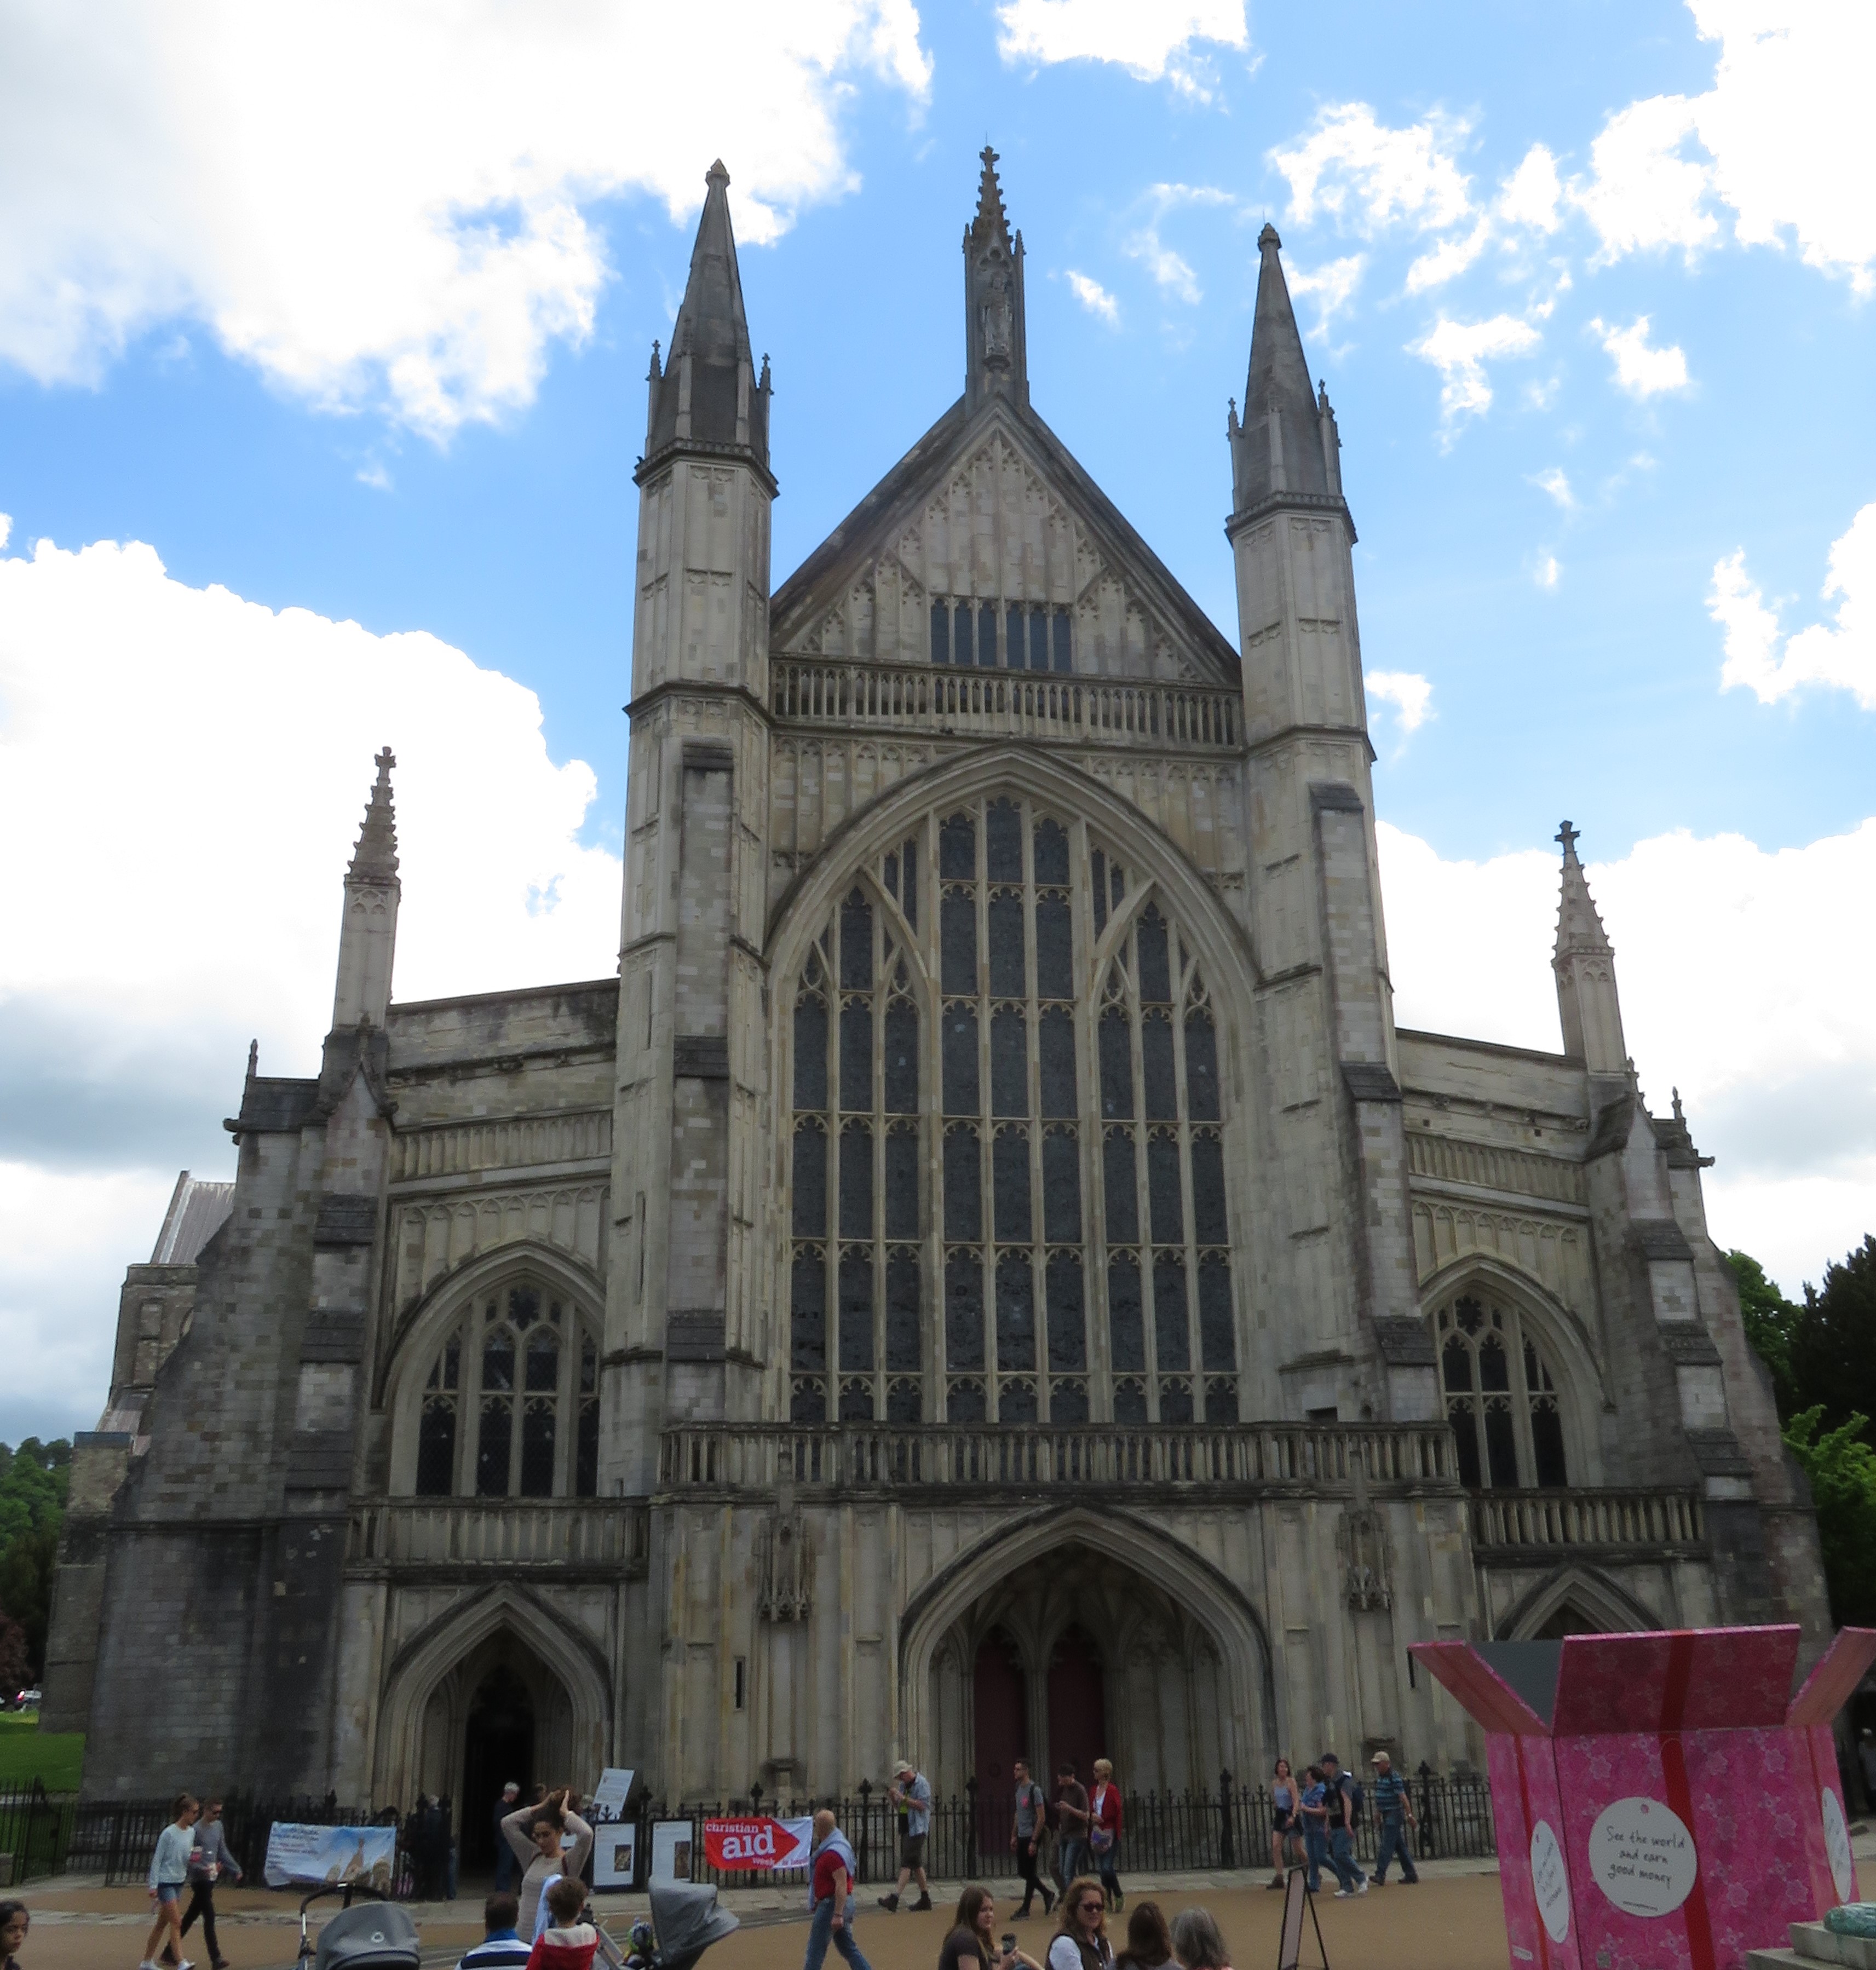 Entrance to Winchester Cathedral